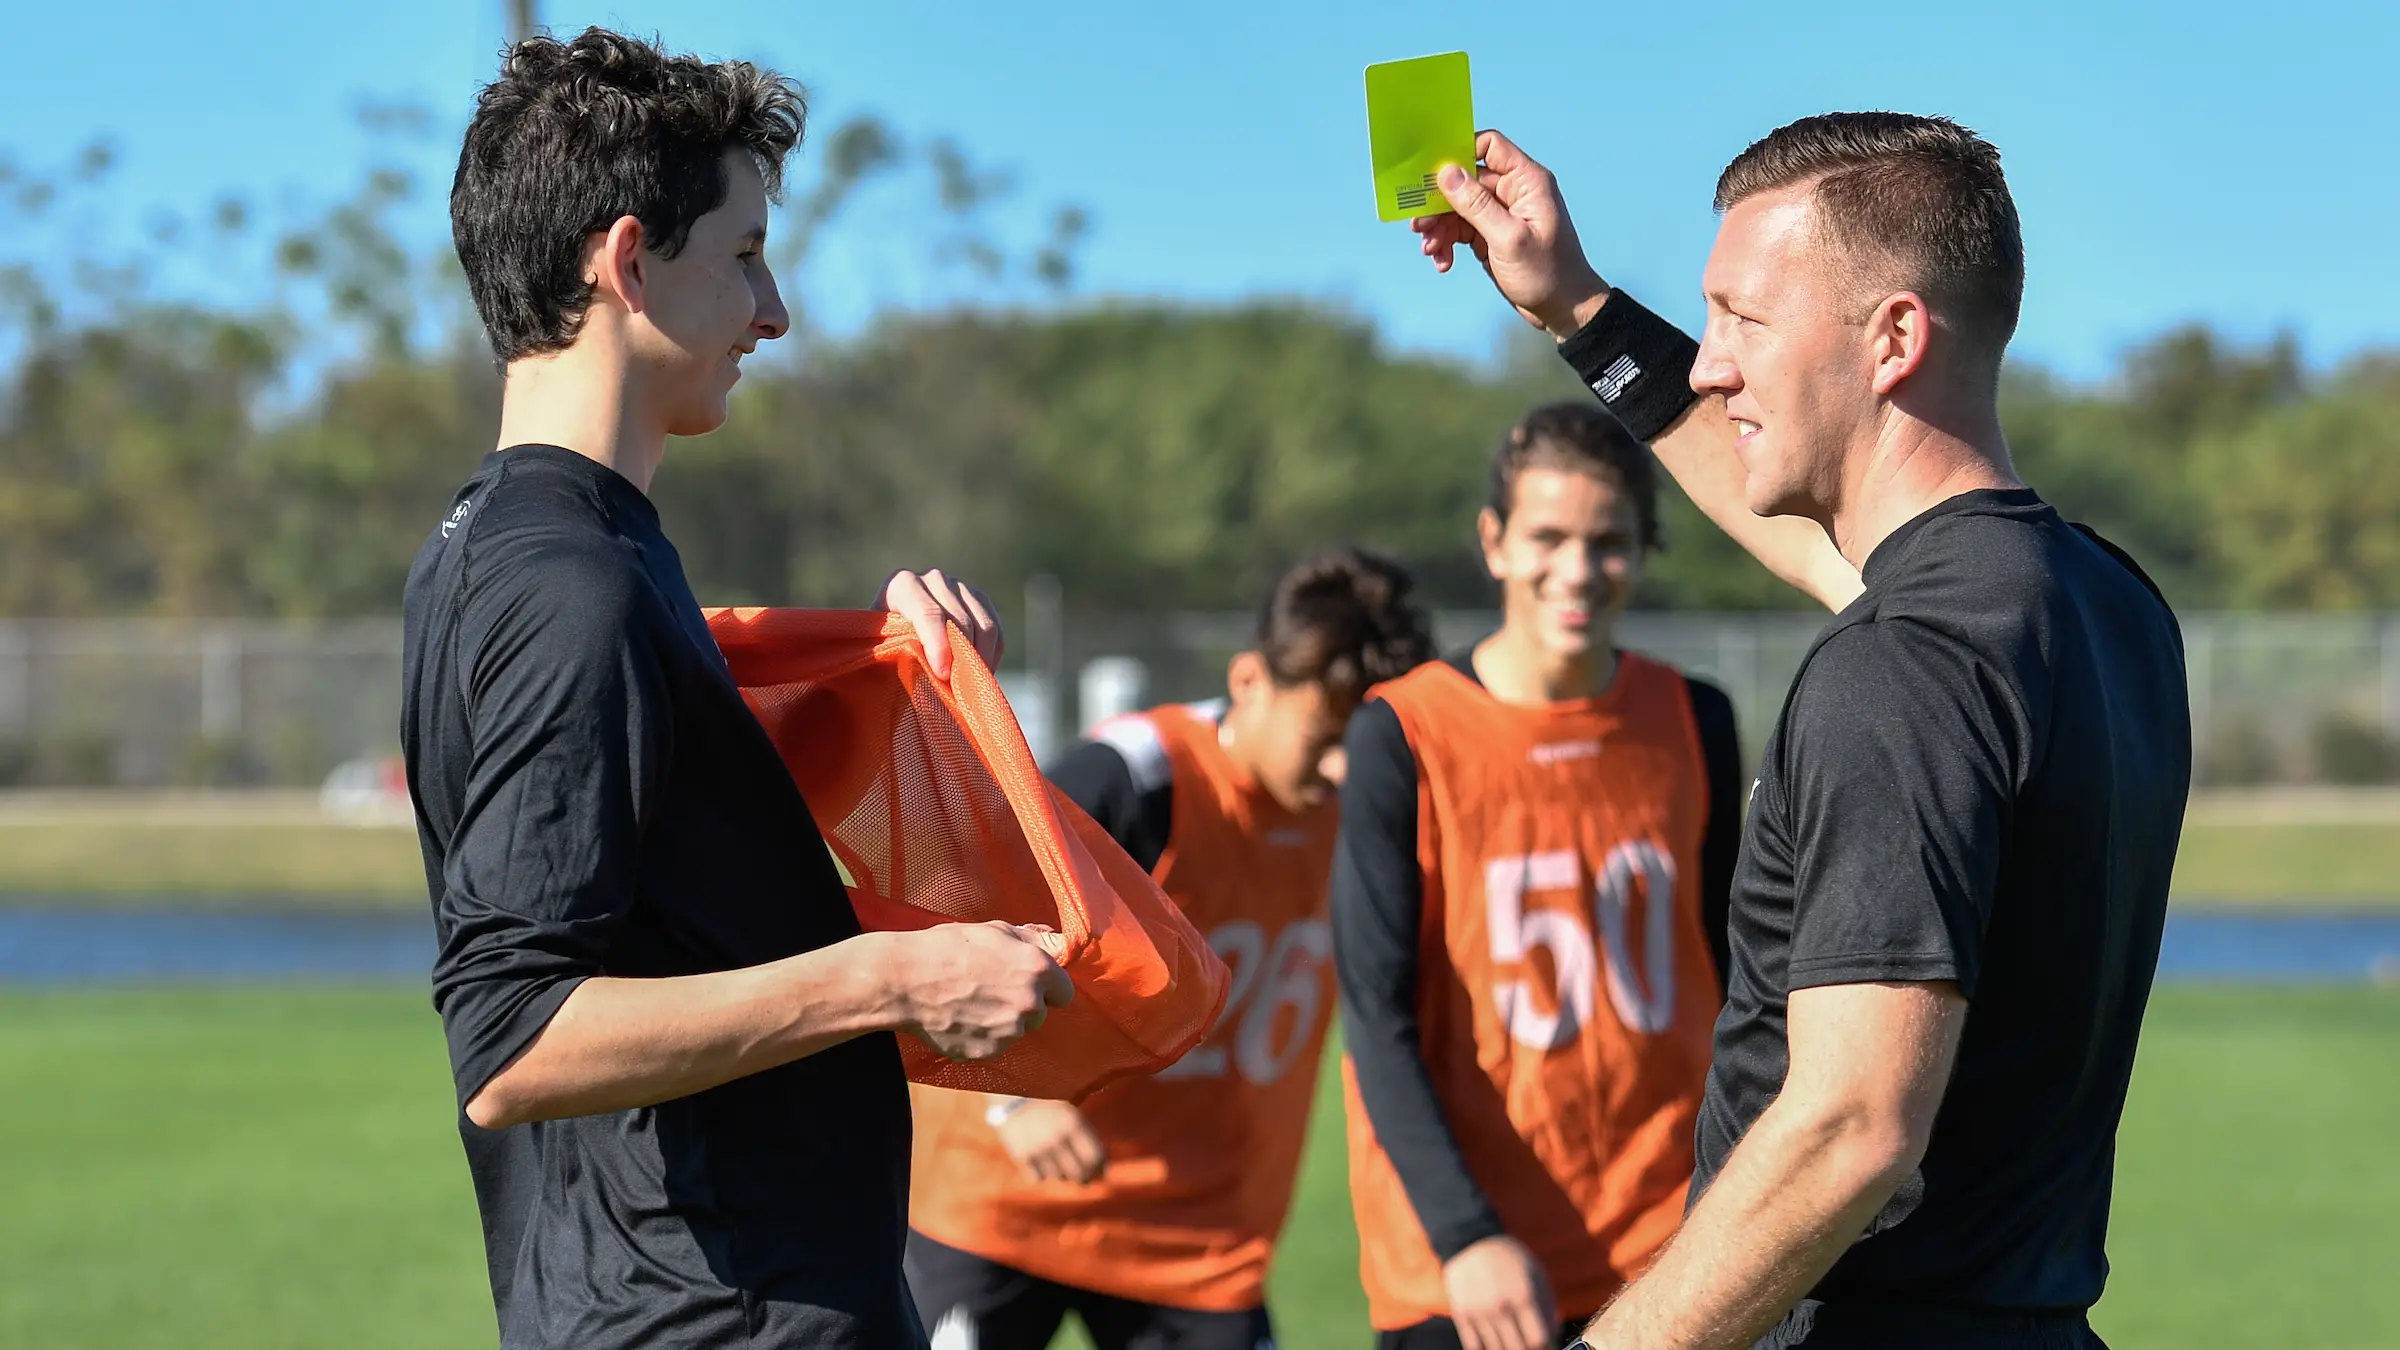 Five Reasons Why You Should Become a Youth Soccer Referee